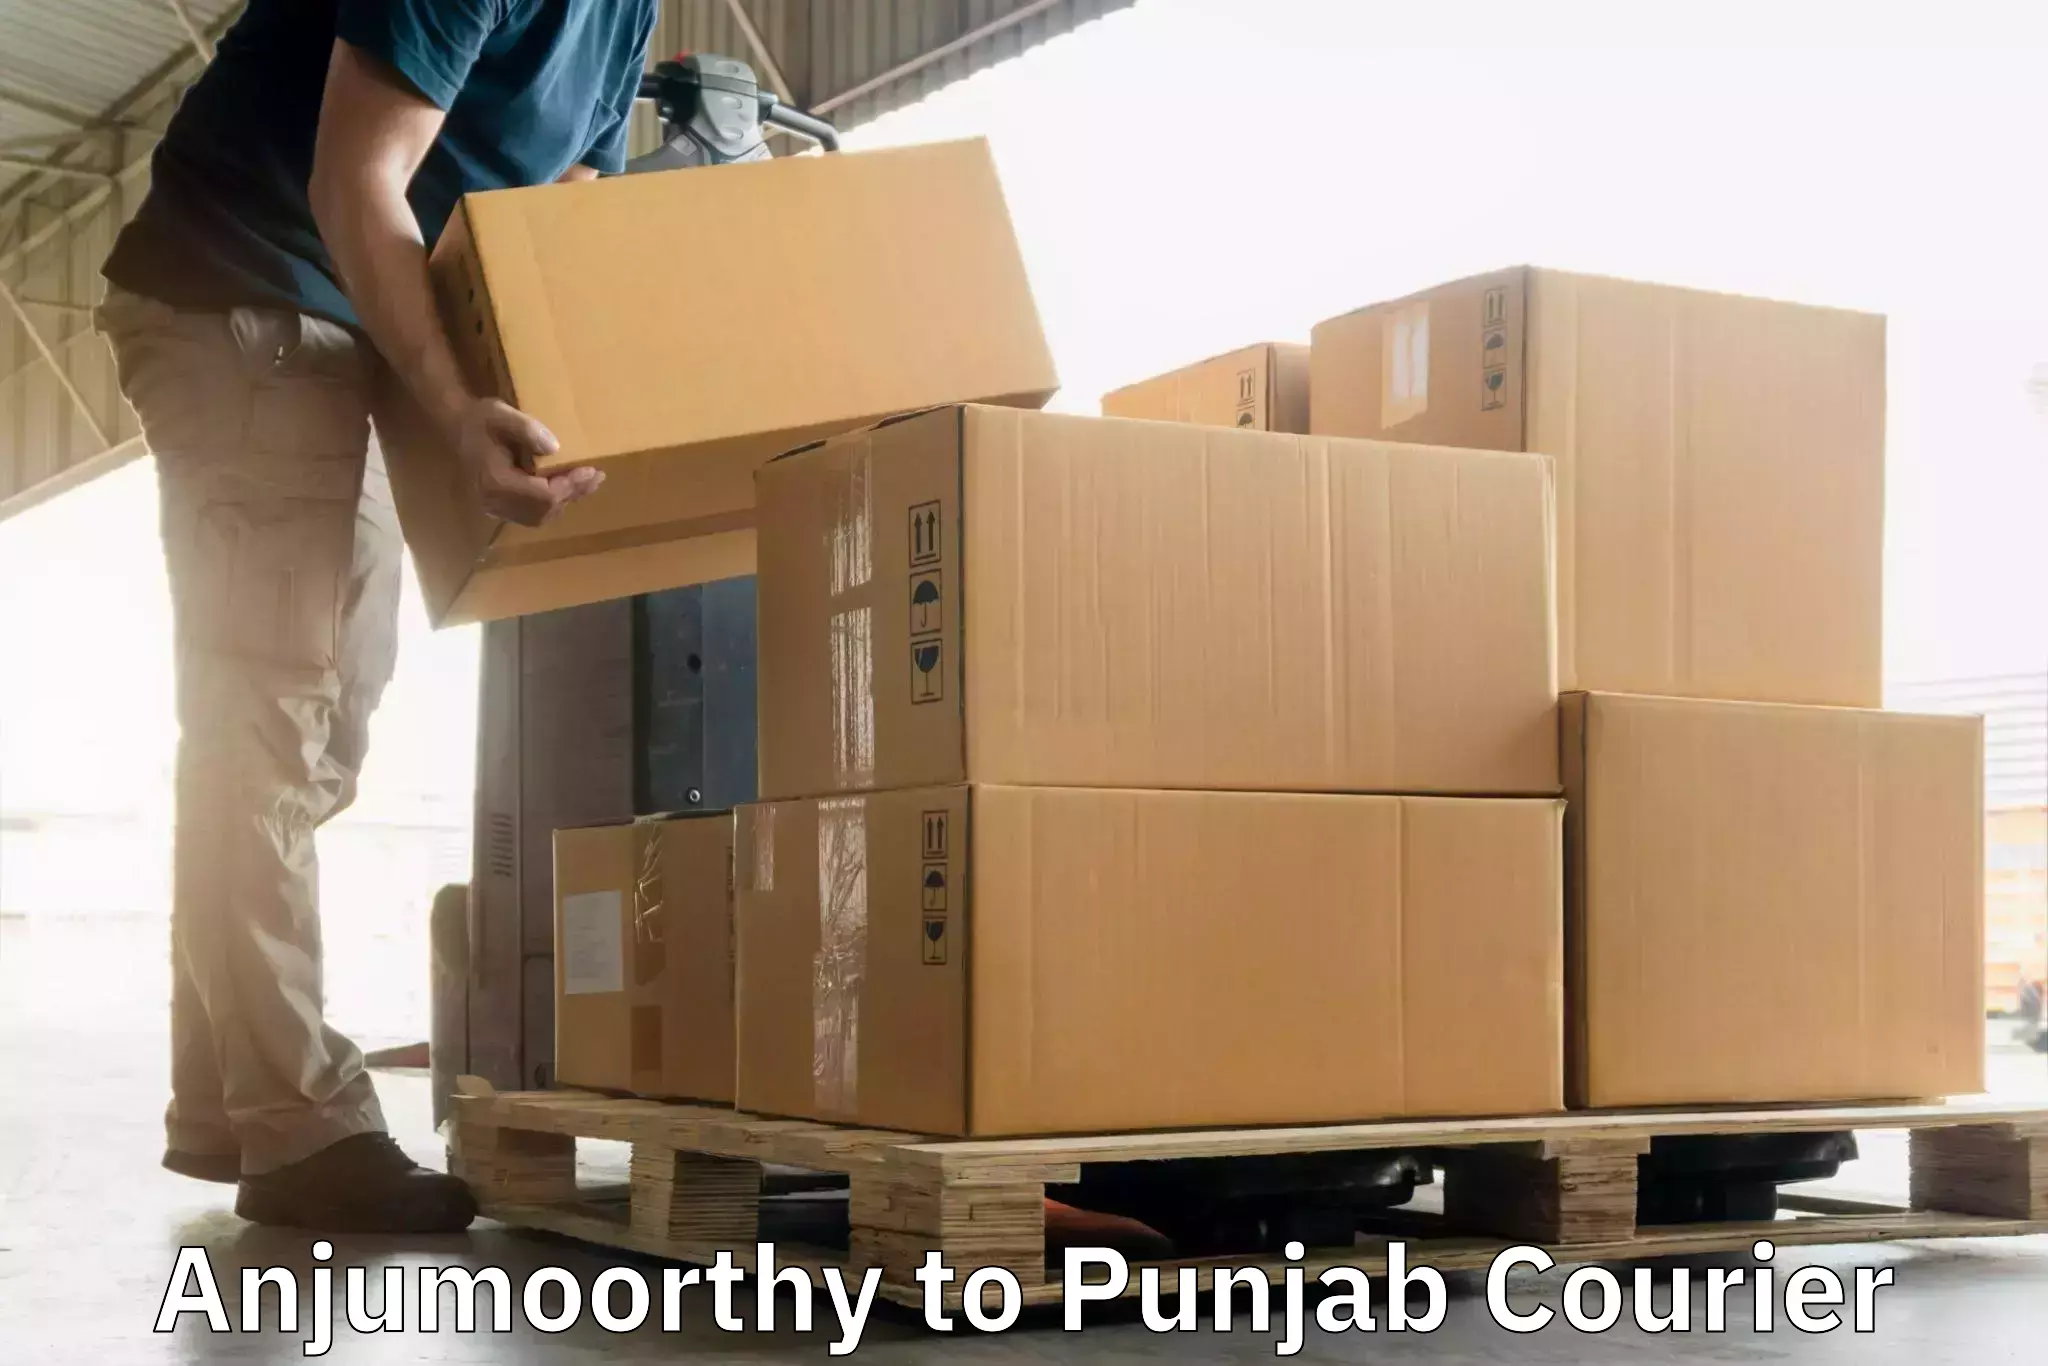 Fastest parcel delivery Anjumoorthy to Firozpur